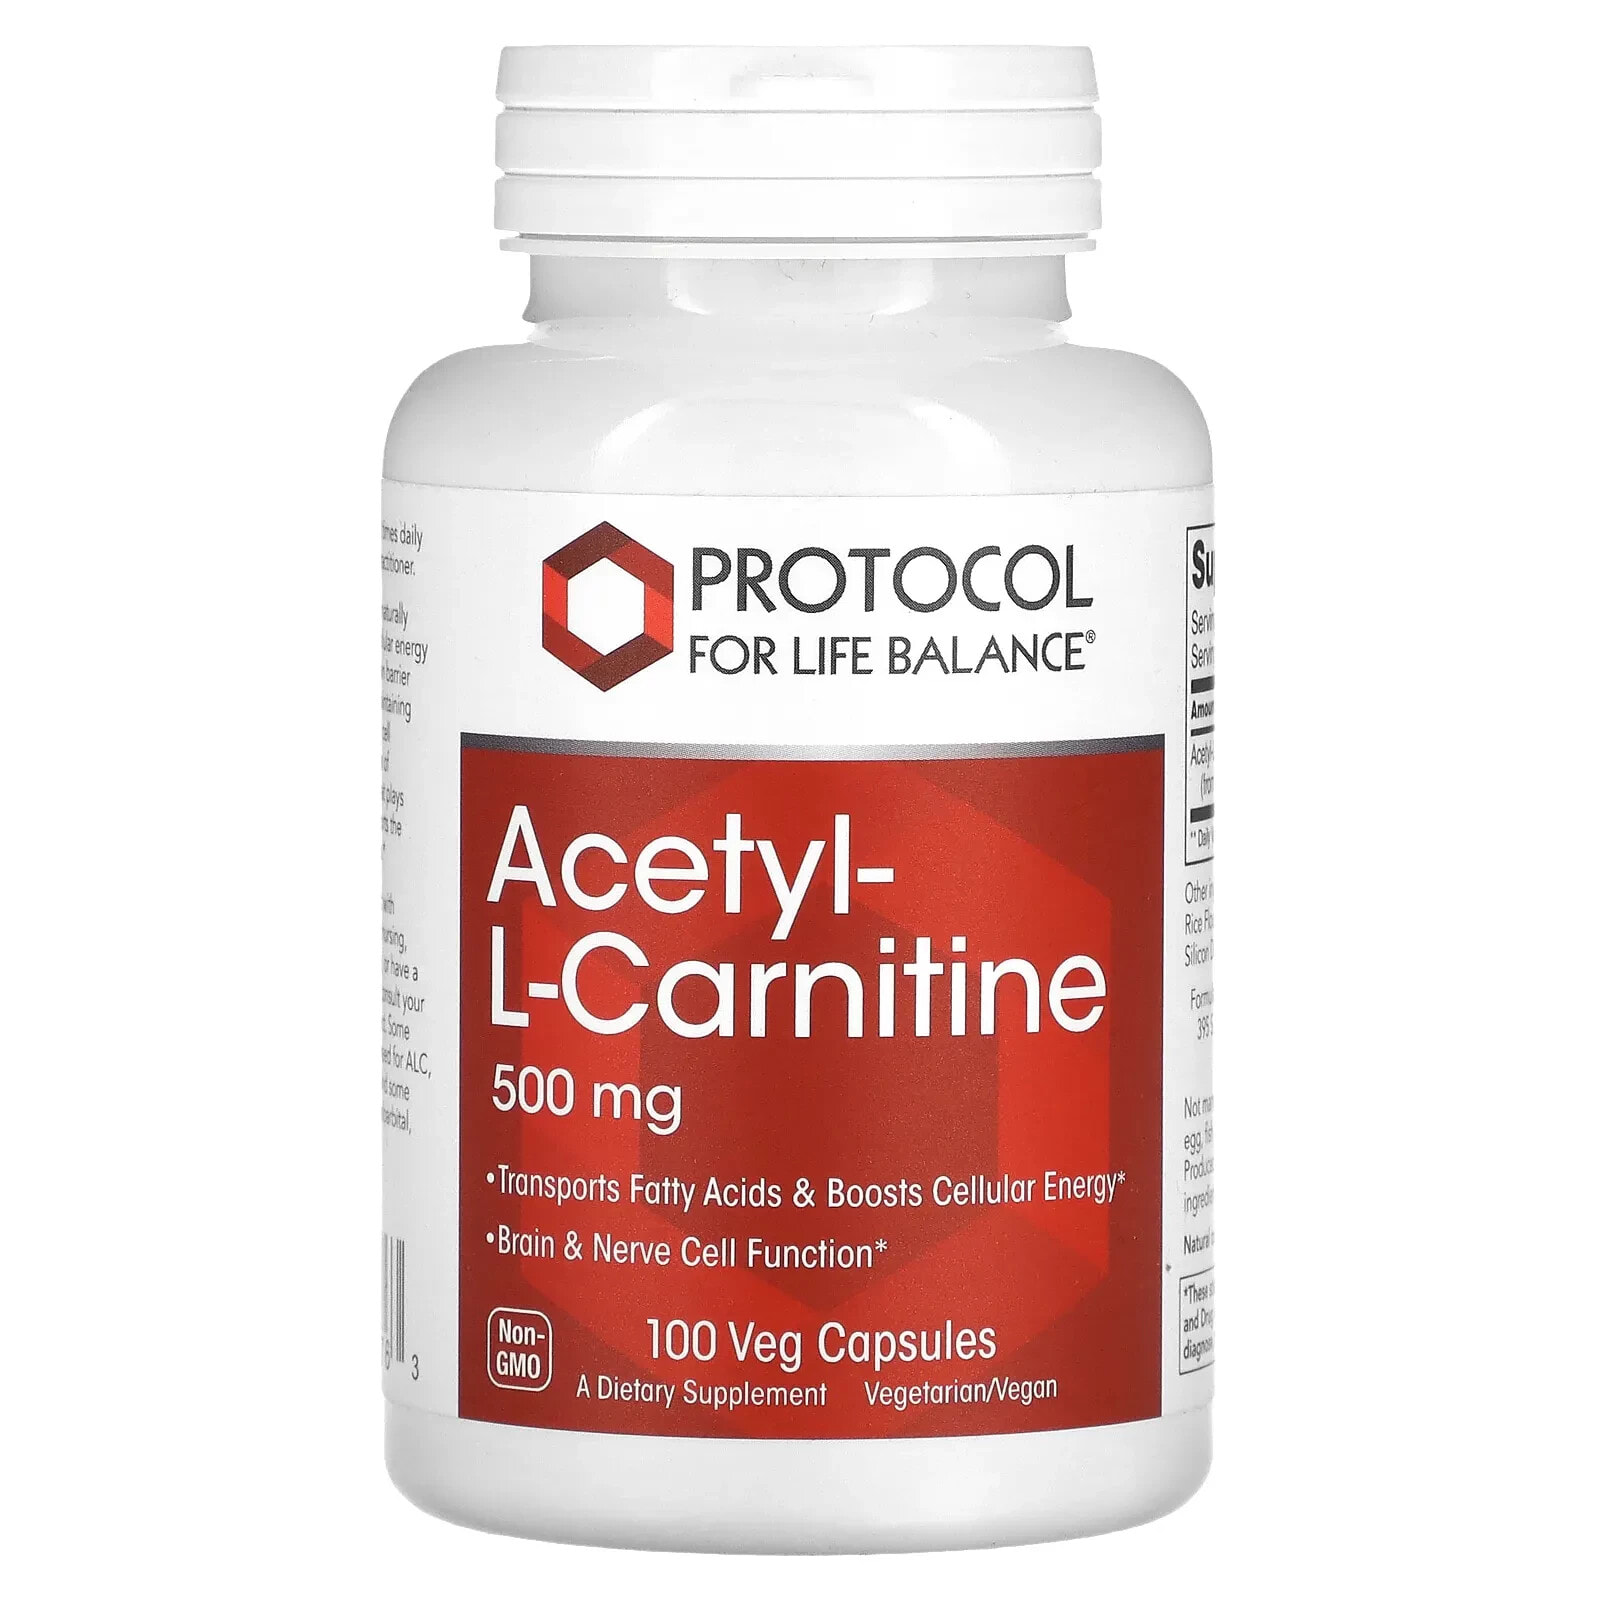 Protocol for Life Balance, Acetyl-L-Carnitine, 500 mg, 100 Veg Capsules